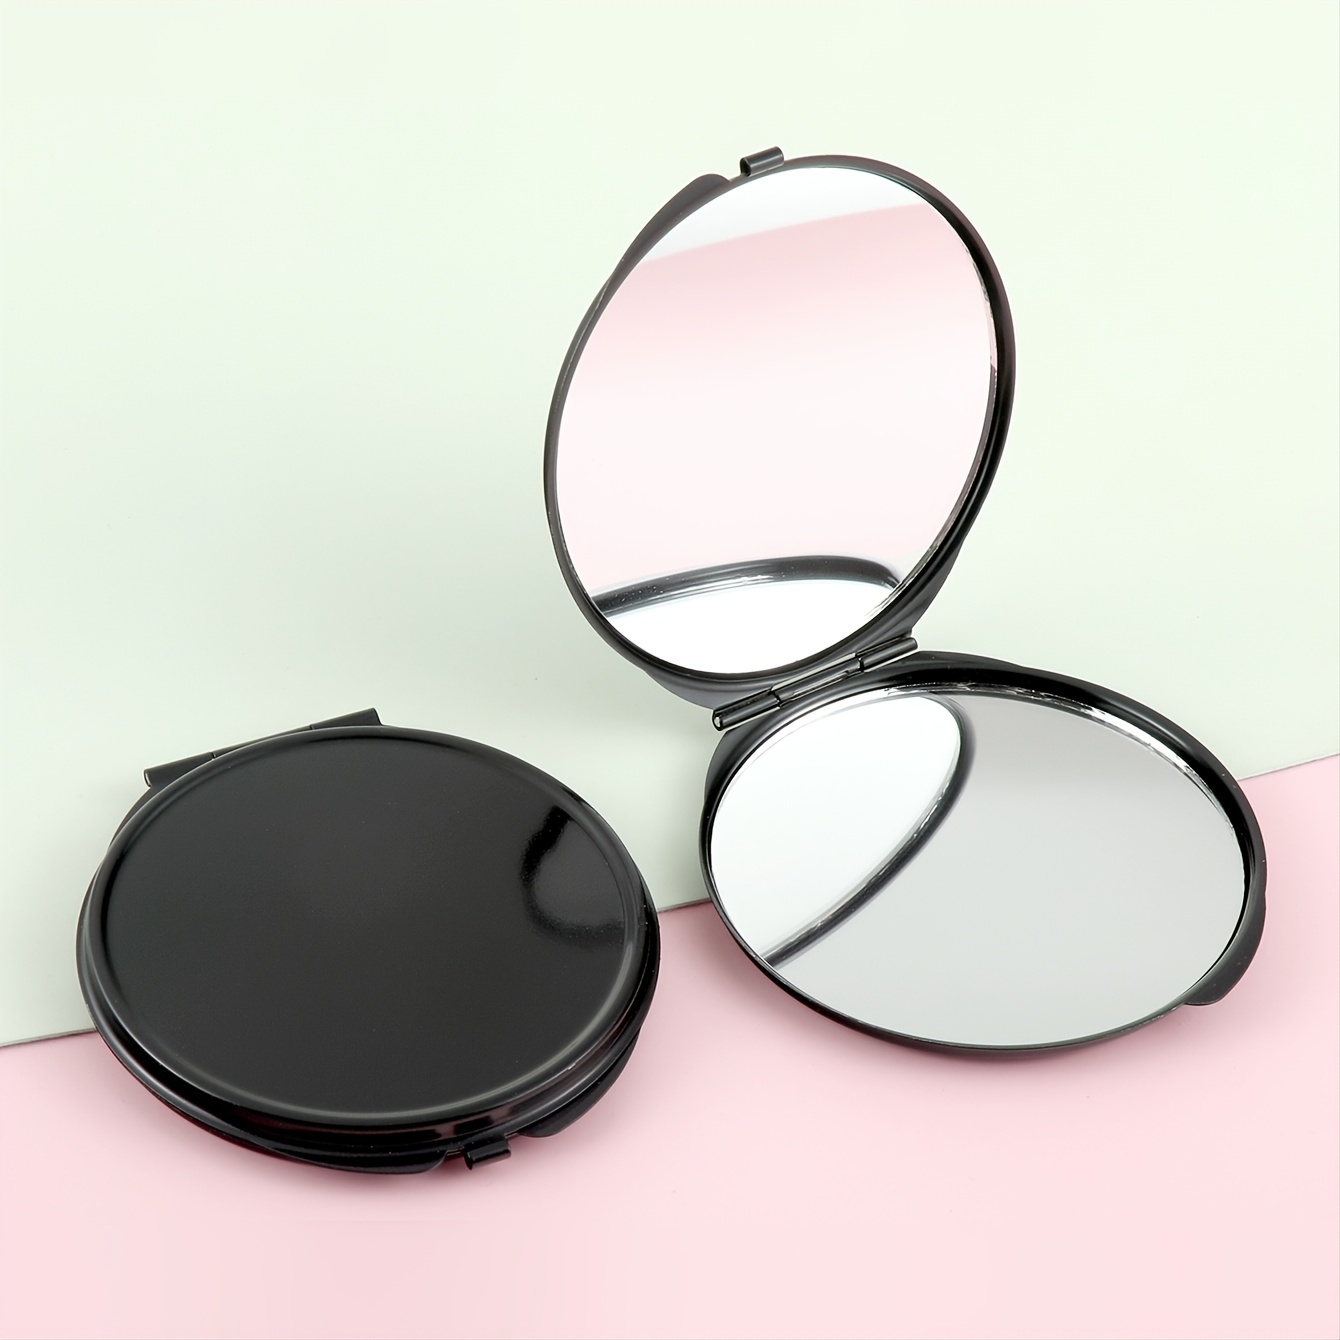 Black Double Sided Makeup Mirror Compact Portable Handbag Mirror Ideal For Party And Travel